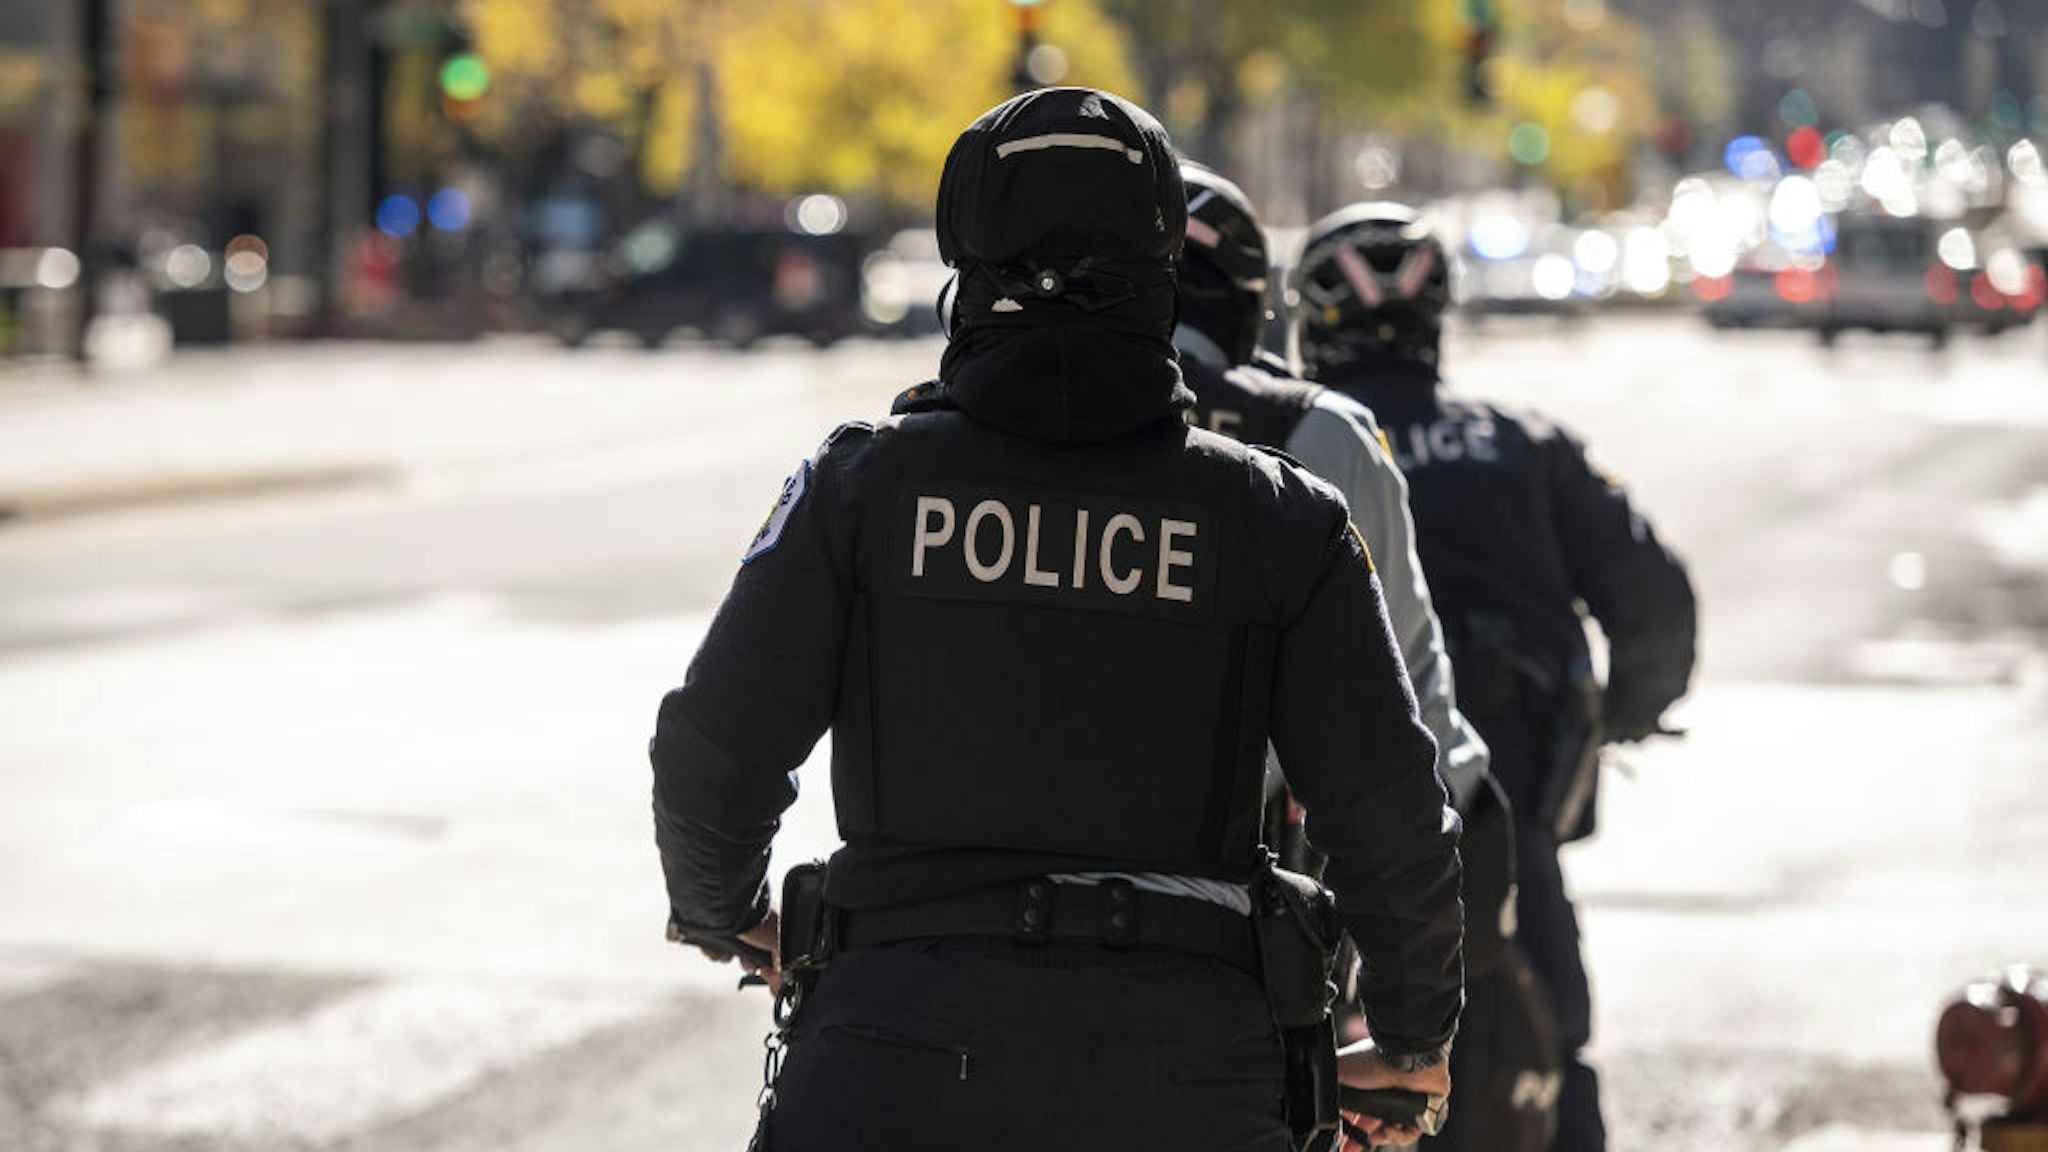 Chicago police officers patrol Michigan Avenue in Chicago, Illinois, U.S., on Nov. 2, 2020. After being caught off guard during nationwide social unrest this summer and suffering millions in damages, retailers have spent months prepping for another possible bout of vandalism on Election Day. Photographer: Christopher Dilts/Bloomberg via Getty Images